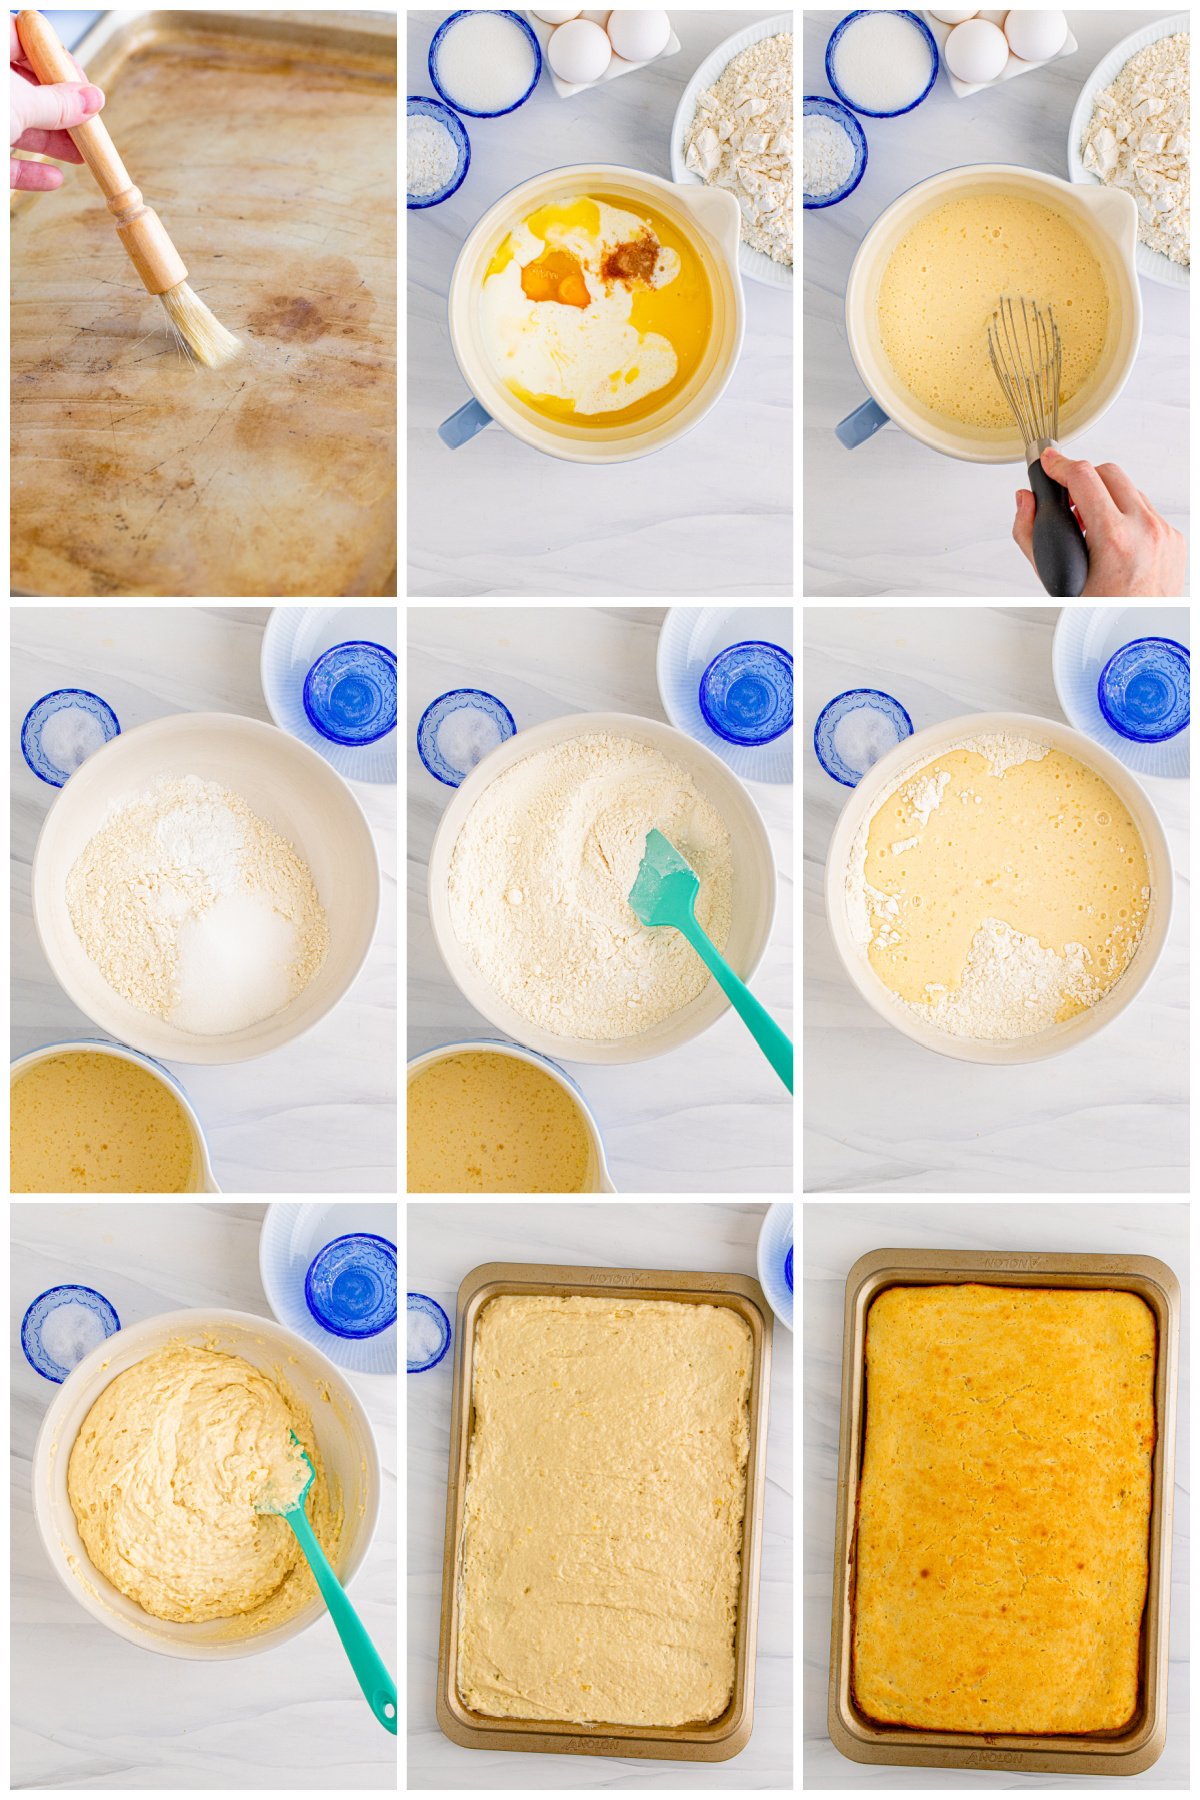 Step by step photos on how to make Sheet Pan Pancakes.